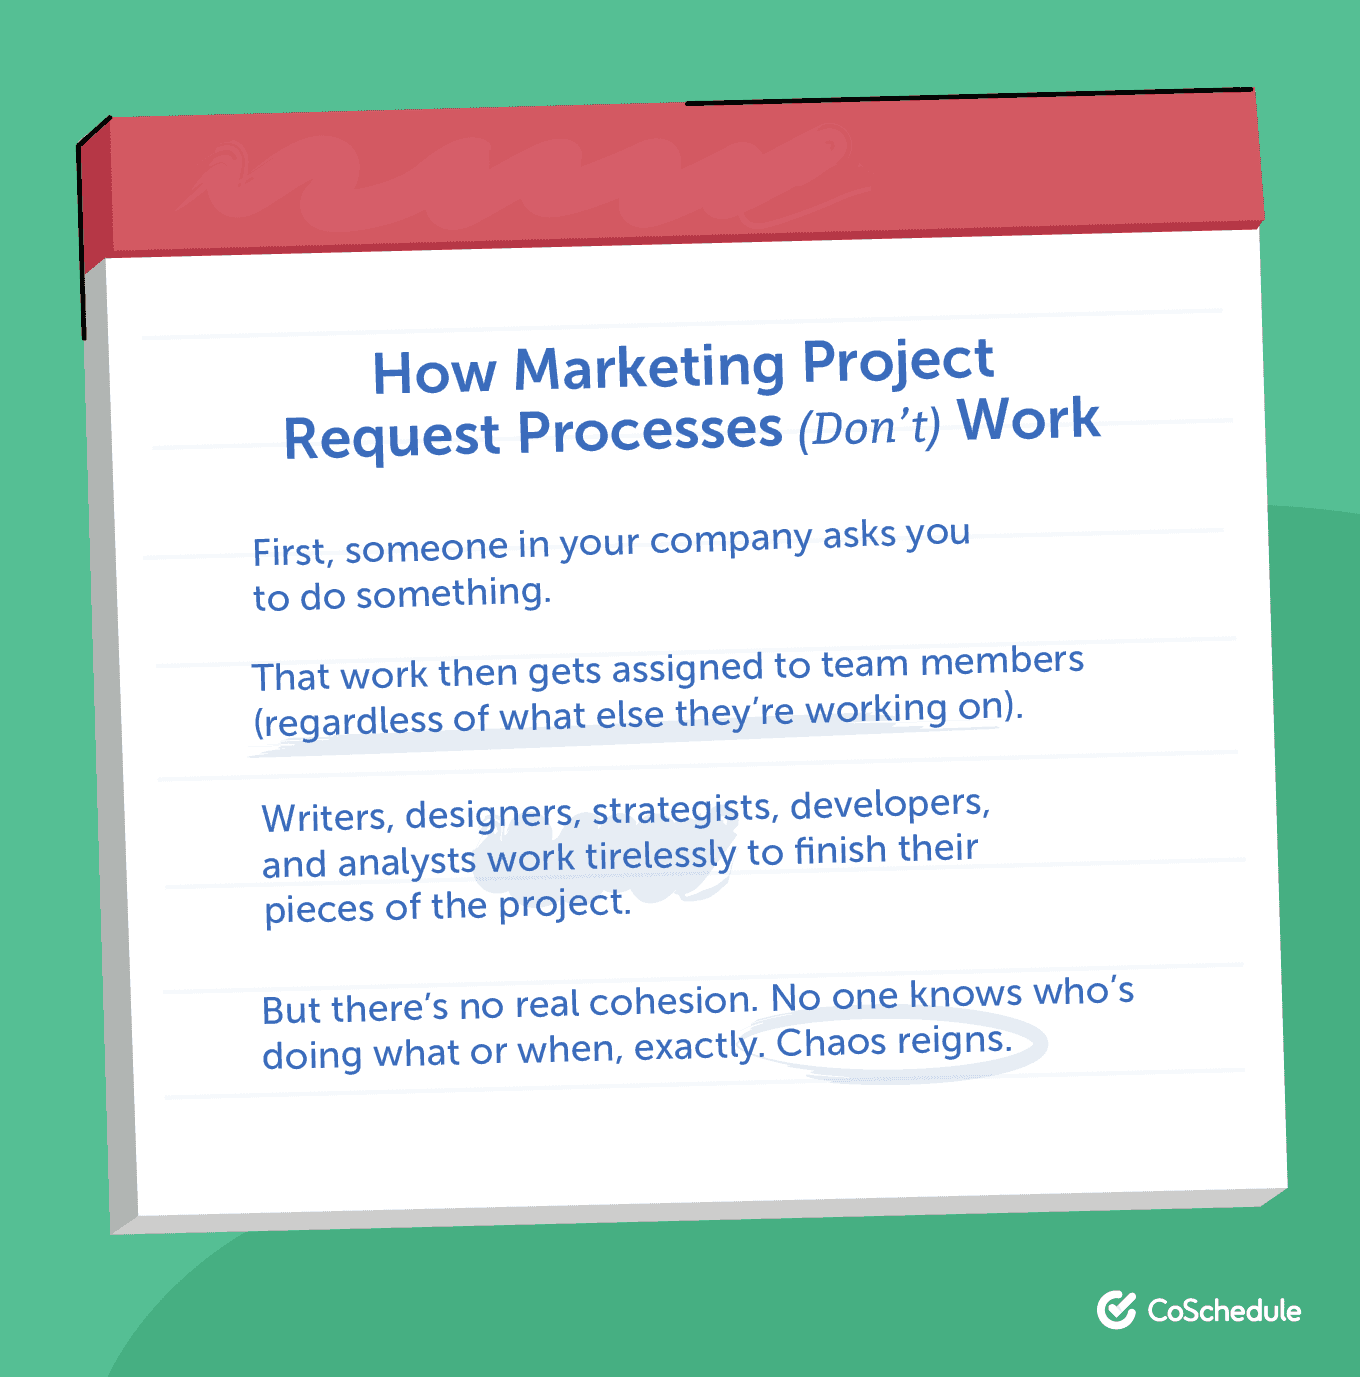 How Marketing Project Request Processes (Don't) Work